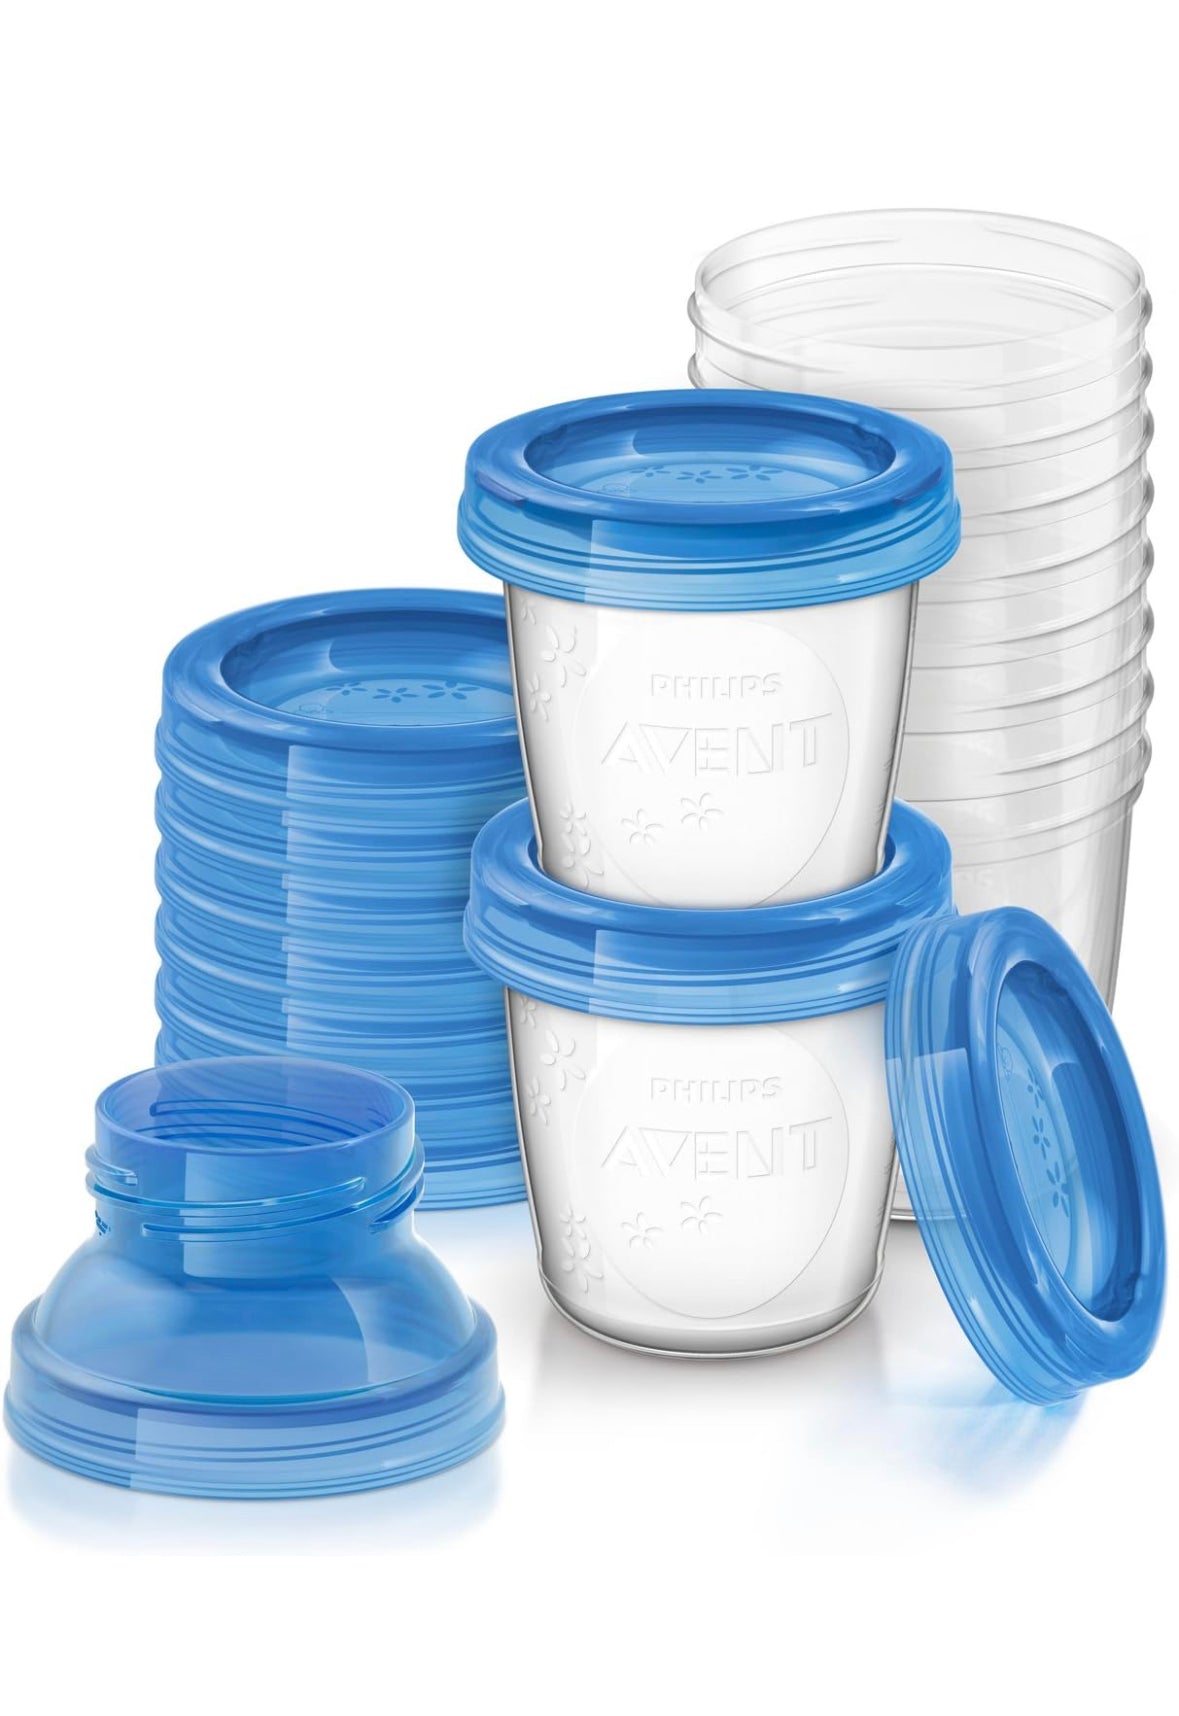 Philips AVENT Breast Milk Storage Cups And Lids, 10 6oz Containers